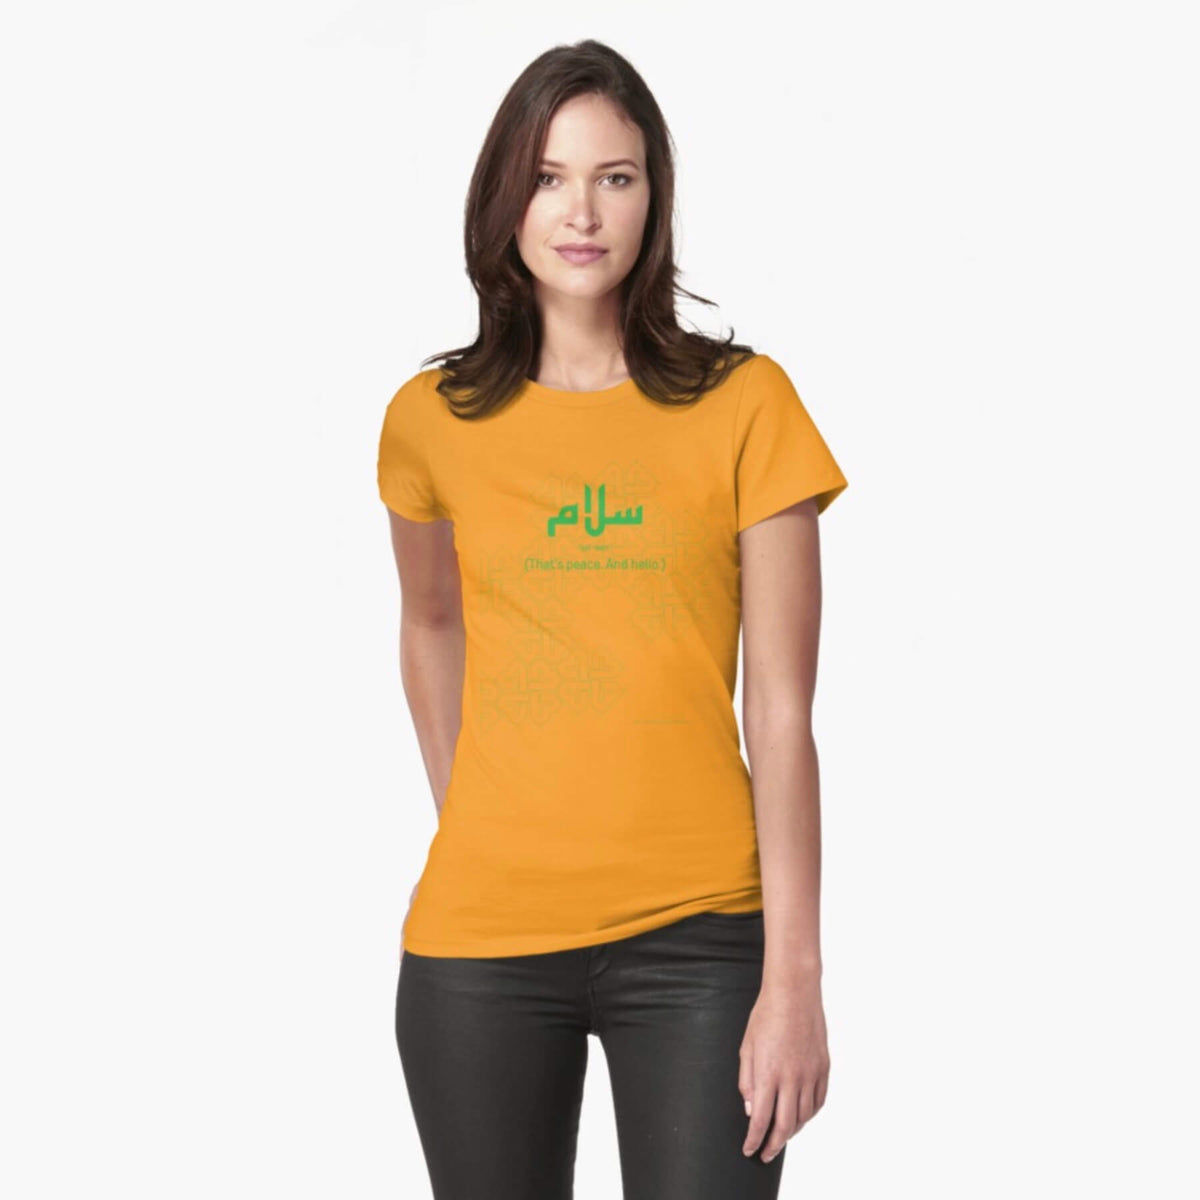 A white female model with hazel eyes and brown shoulder-length hair wears the Haluna Happy Names exclusive &#39;Salaam—Arabic Key Words&#39; design gold fitted t-shirt and a pair of tight black jeans. The word &#39;salaam&#39; is written in green in Arabic with a kufic-style font, and beneath it in English the words &quot;Sal-aam&quot; and beneath that the words &#39;(That means peace. And hello)&#39;. The text is positioned on the tshirt so it falls across the chest of the model against a complementary green patterned background print.